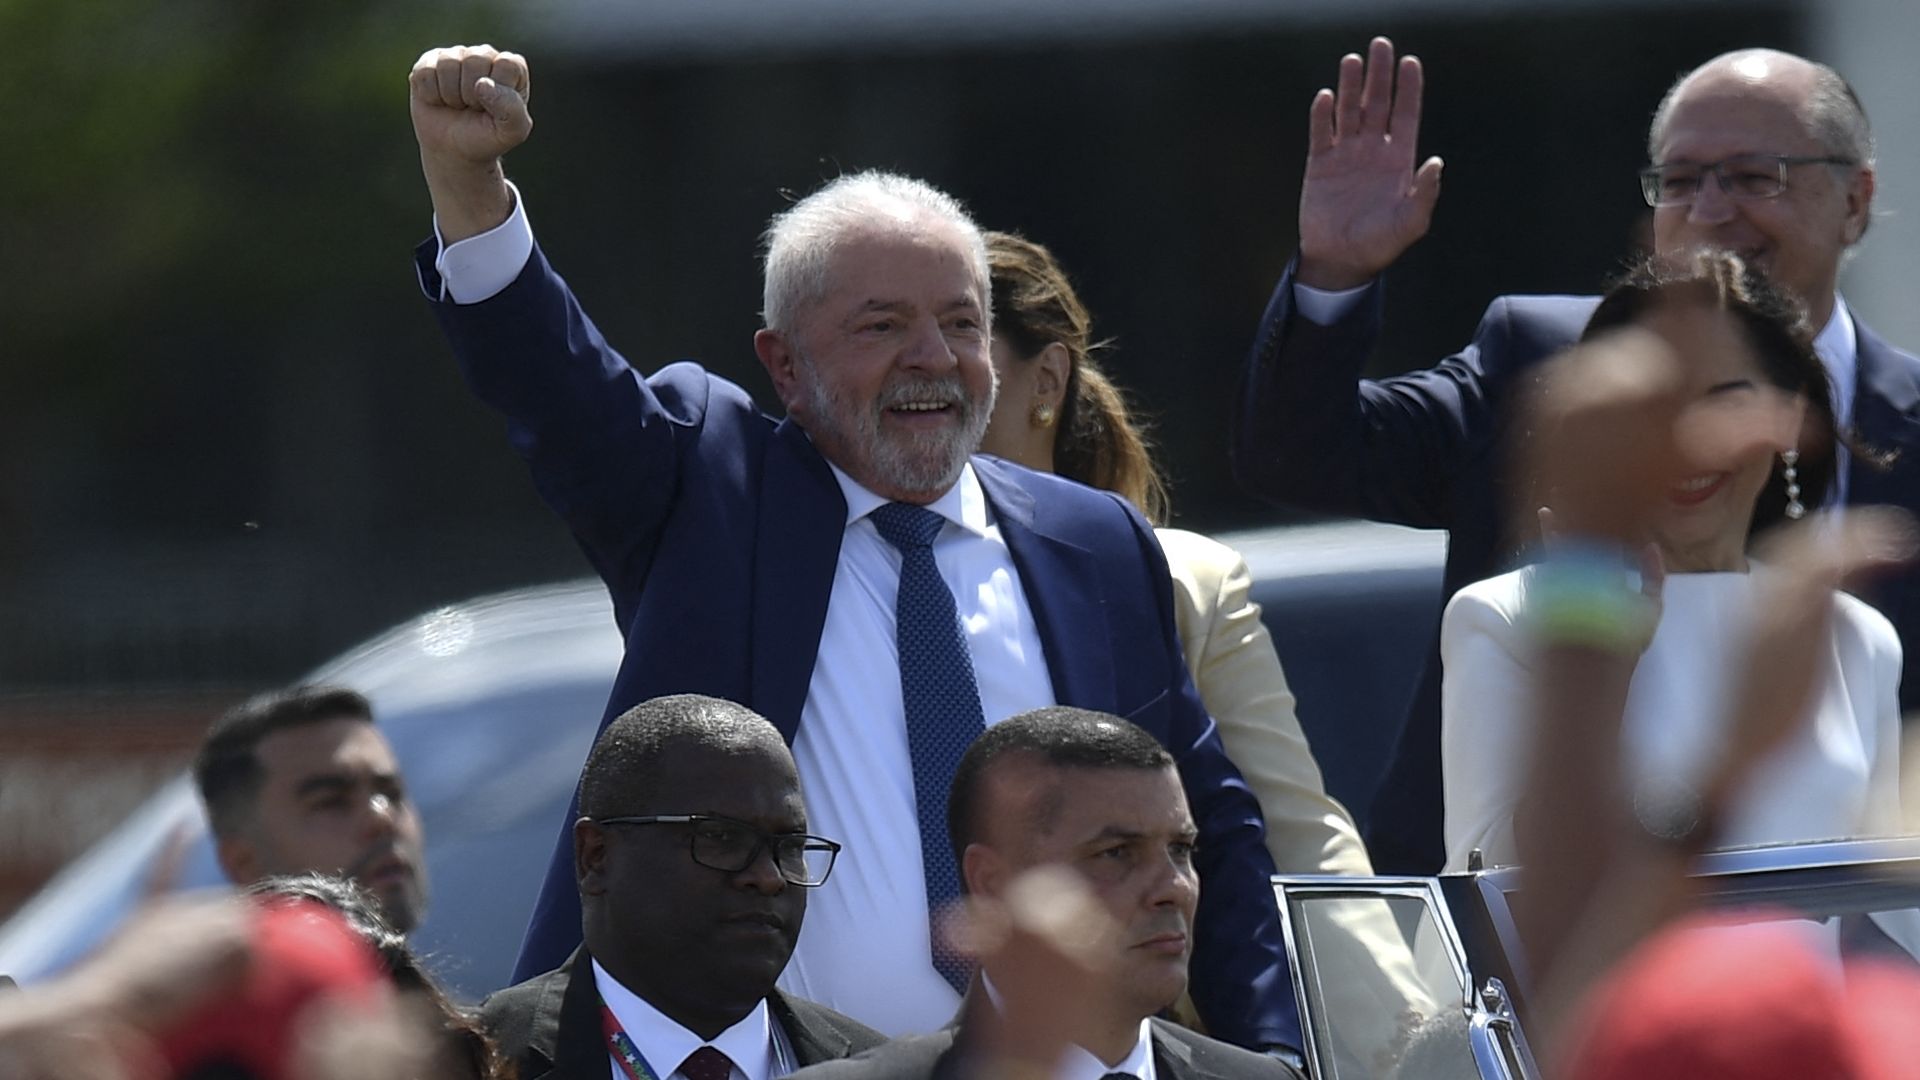 Luiz Inacio Lula da Silva gestures at supporters on his way to Brazil's National Congress for his inauguration ceremony. Photo: Carl de Souza/AFP via Getty Images